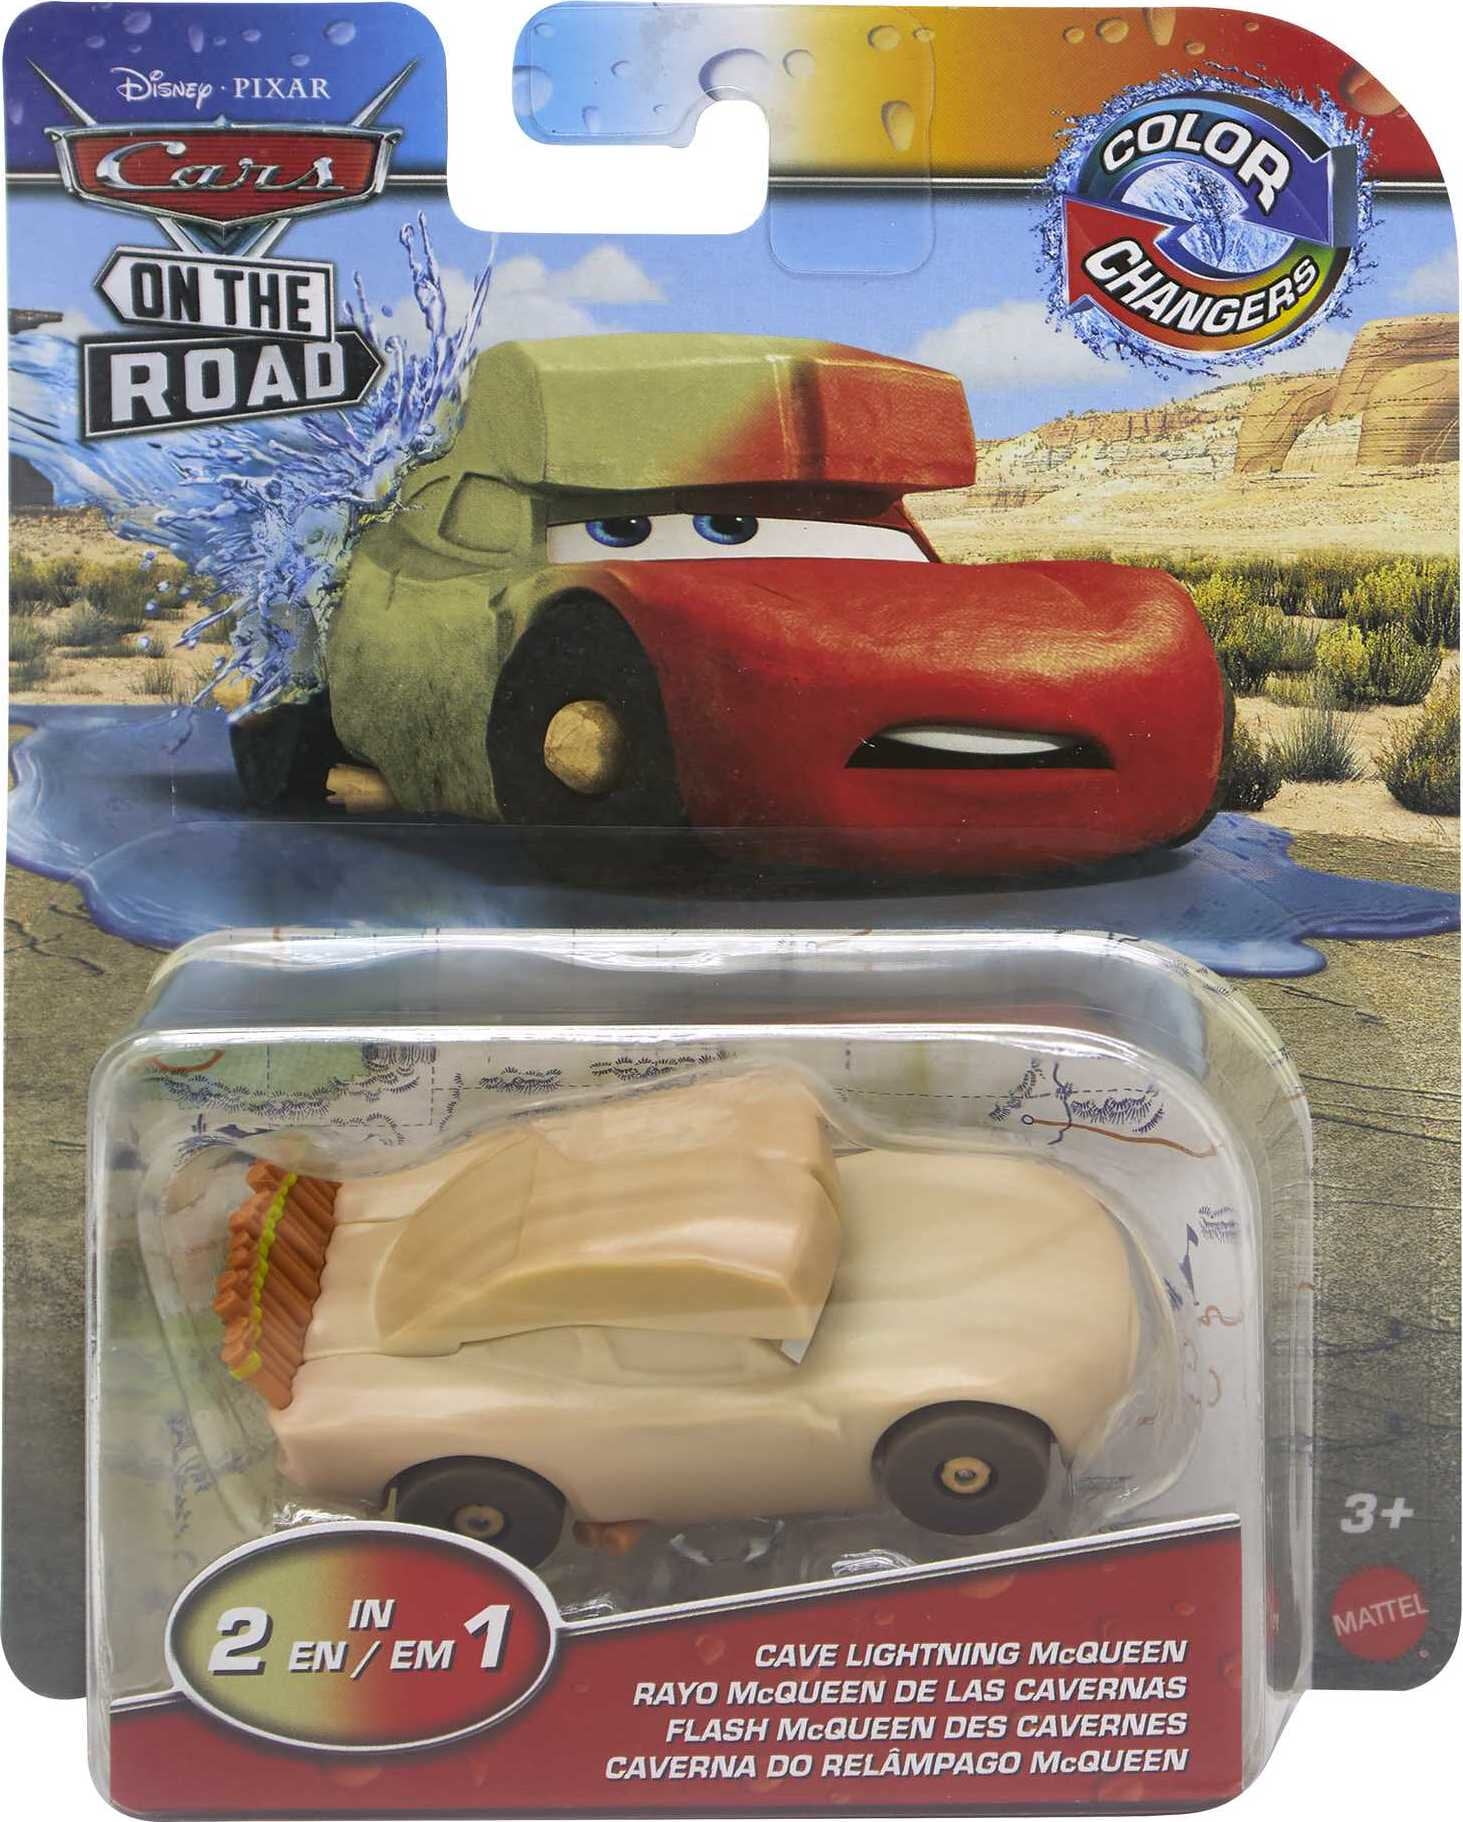 Disney and Pixar Cars On The Road Color Changers Cave Lightning McQueen Toy  Car in 1:55 Scale 